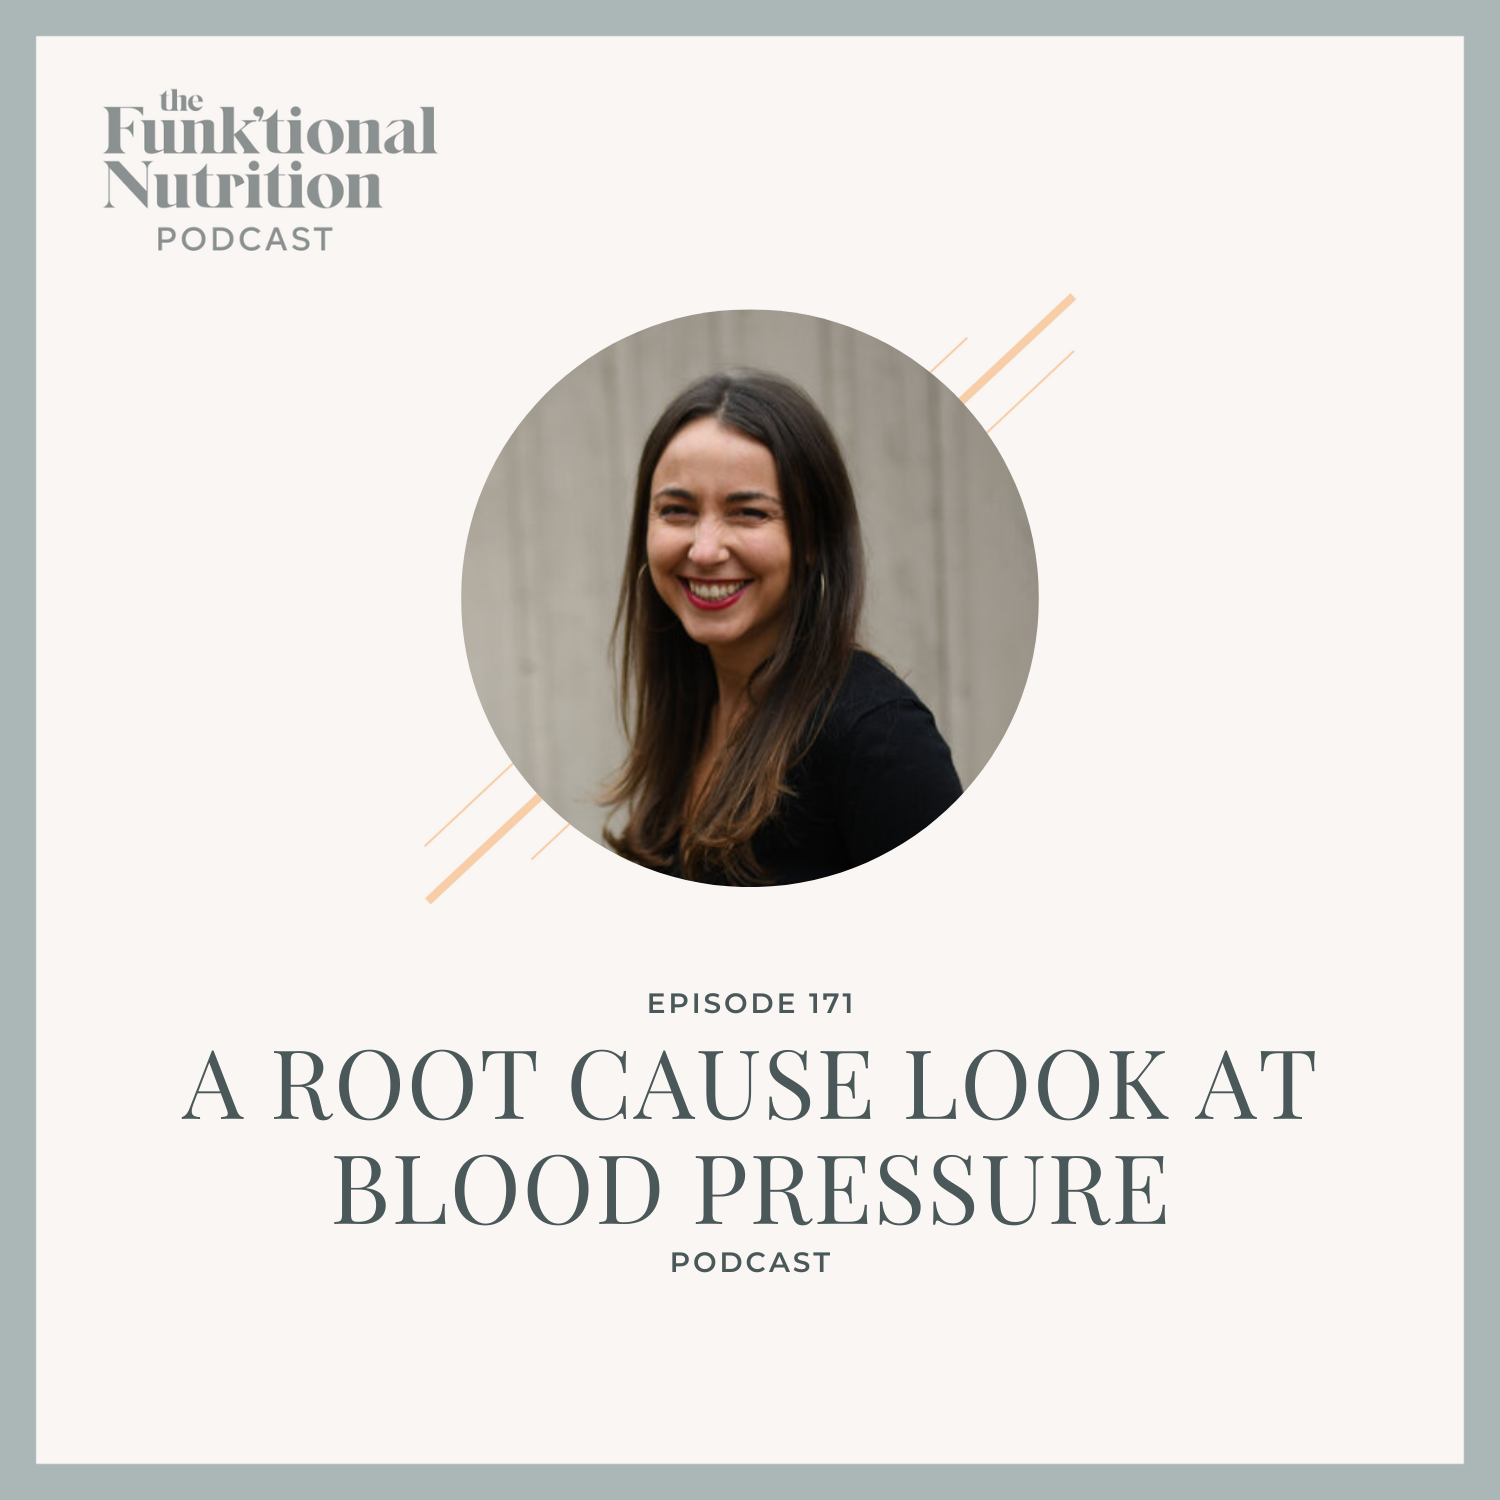 Episode-171-A-Root-Cause-Look-at-Blood-Pressure_-The-Funk_tional-Nutrition-Podcas.png